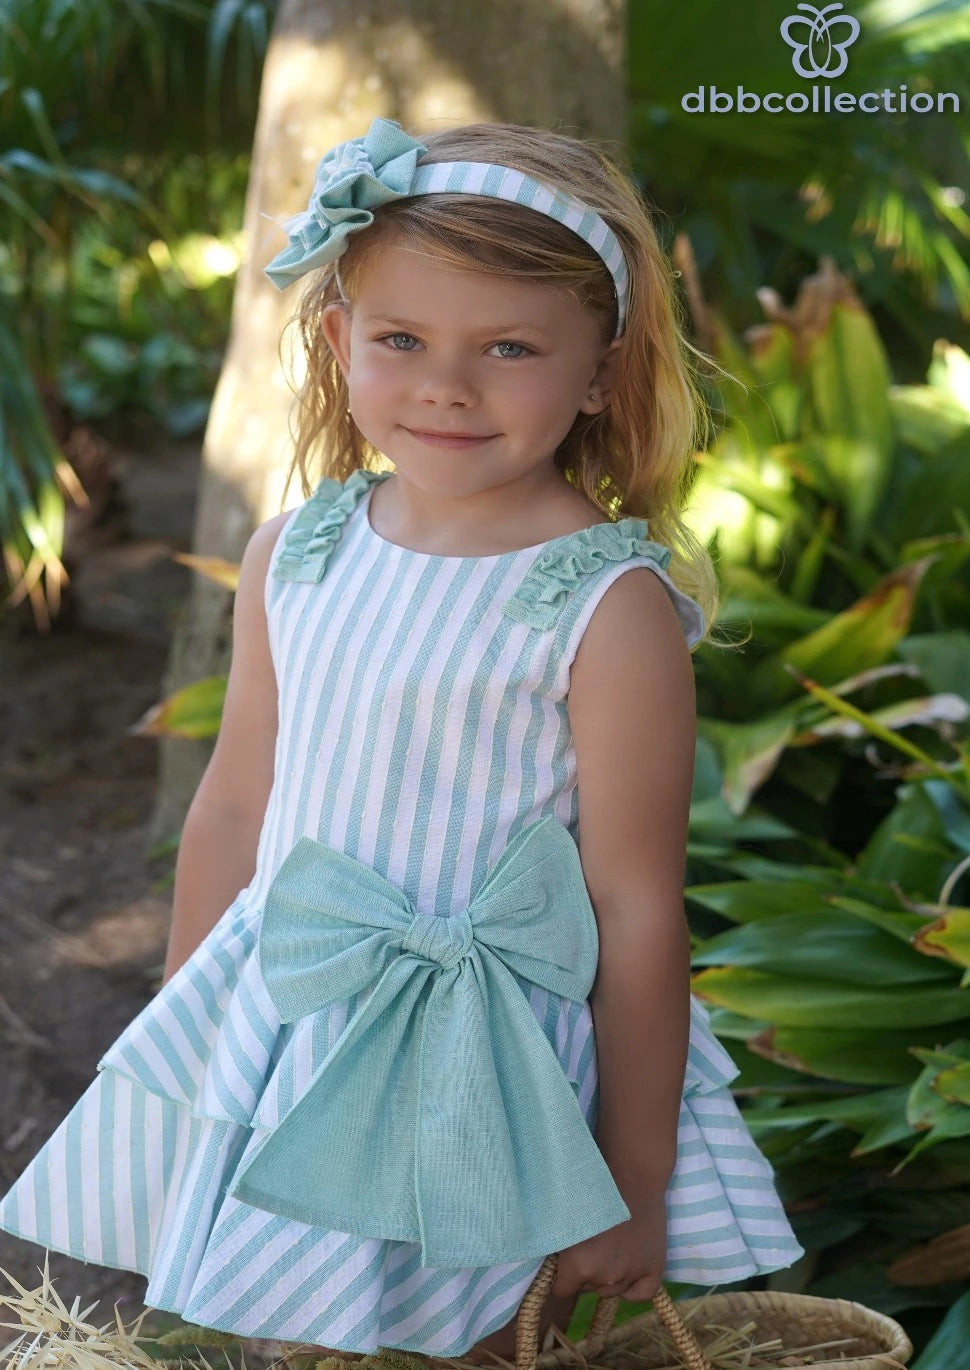 dbb collections mint dress and headband